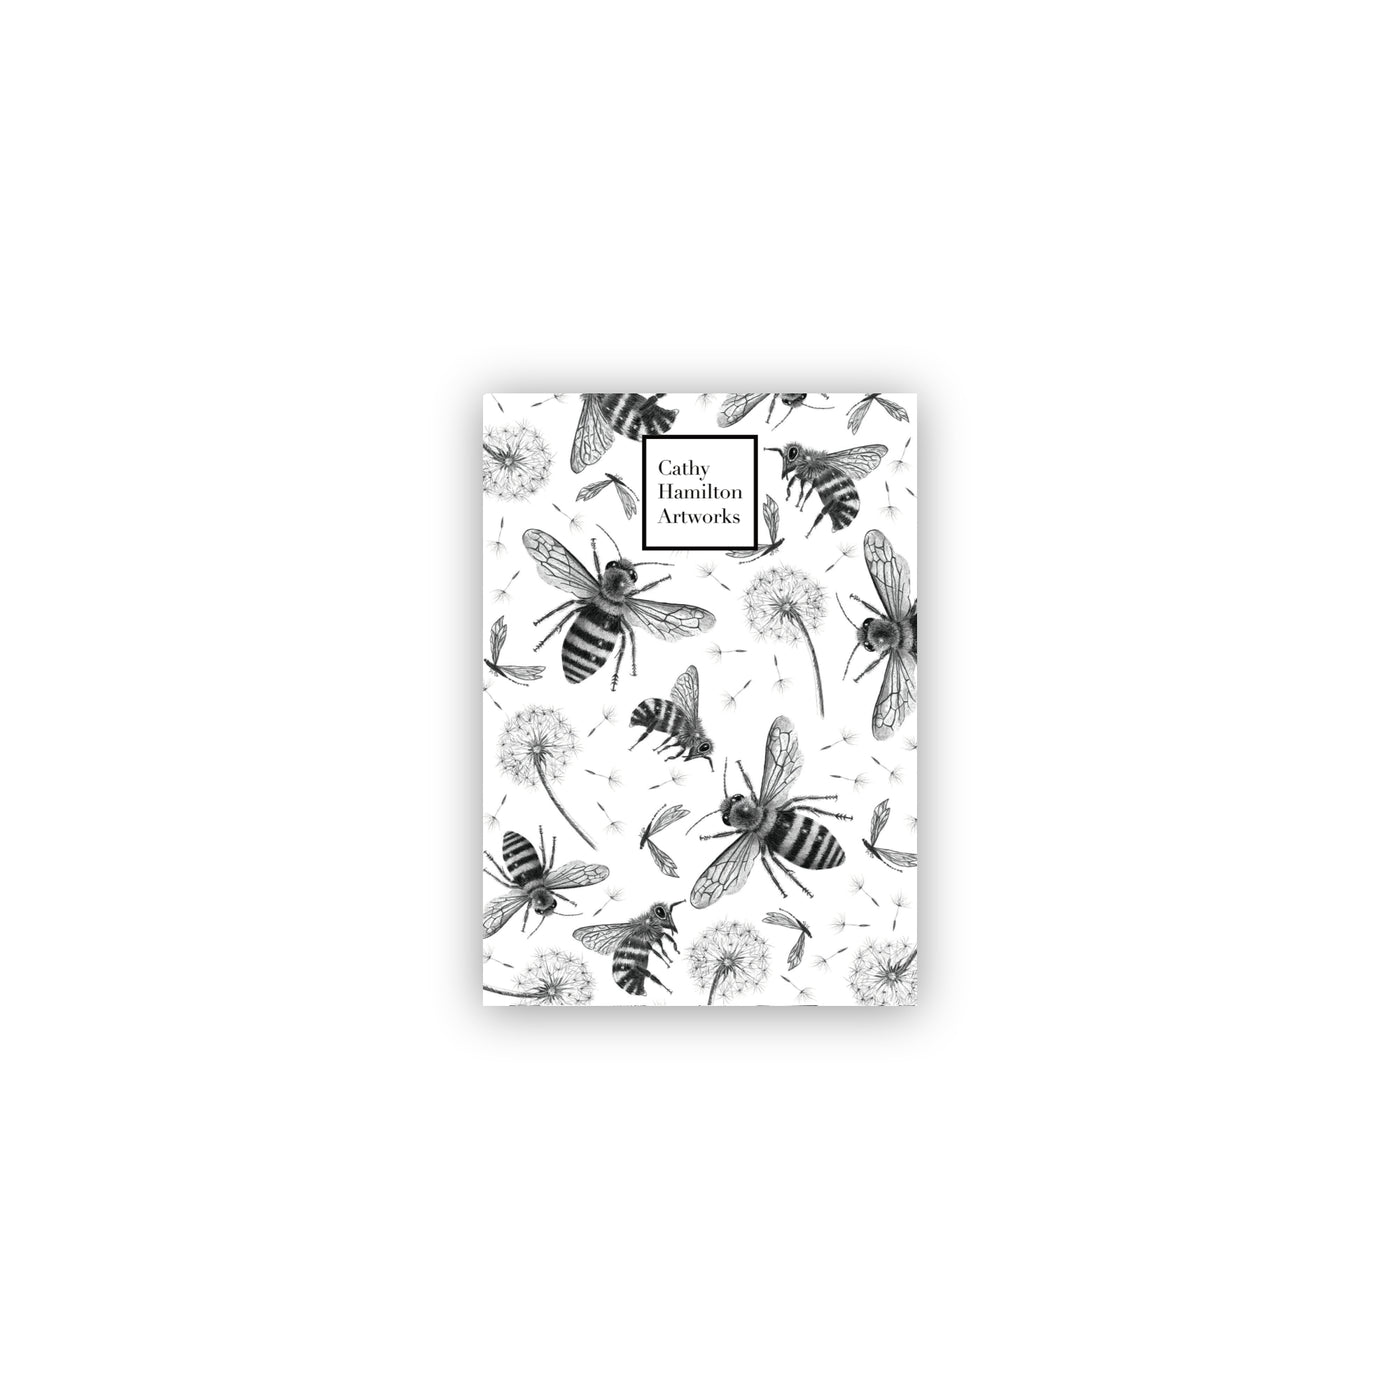 Bee A6 Notepad - Wholesale Qty 3